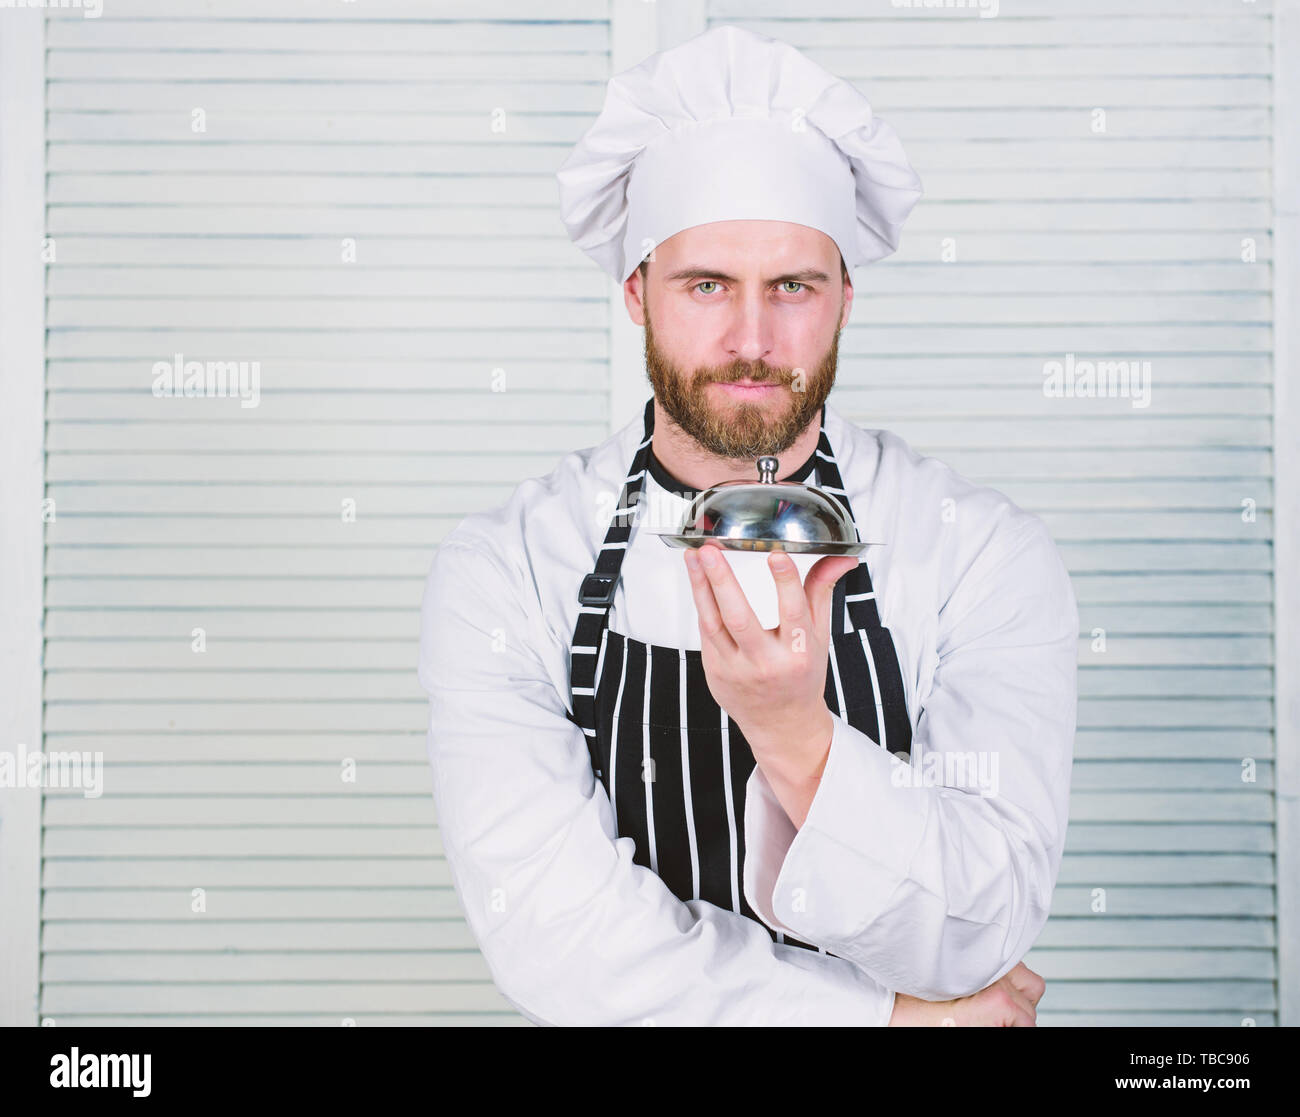 https://c8.alamy.com/comp/TBC906/man-cook-hat-and-apron-hold-meal-covered-with-lid-delicious-meal-presentation-haute-cuisine-characterized-meticulous-preparation-and-careful-presentation-meal-secret-meal-presentation-chefs-dish-TBC906.jpg